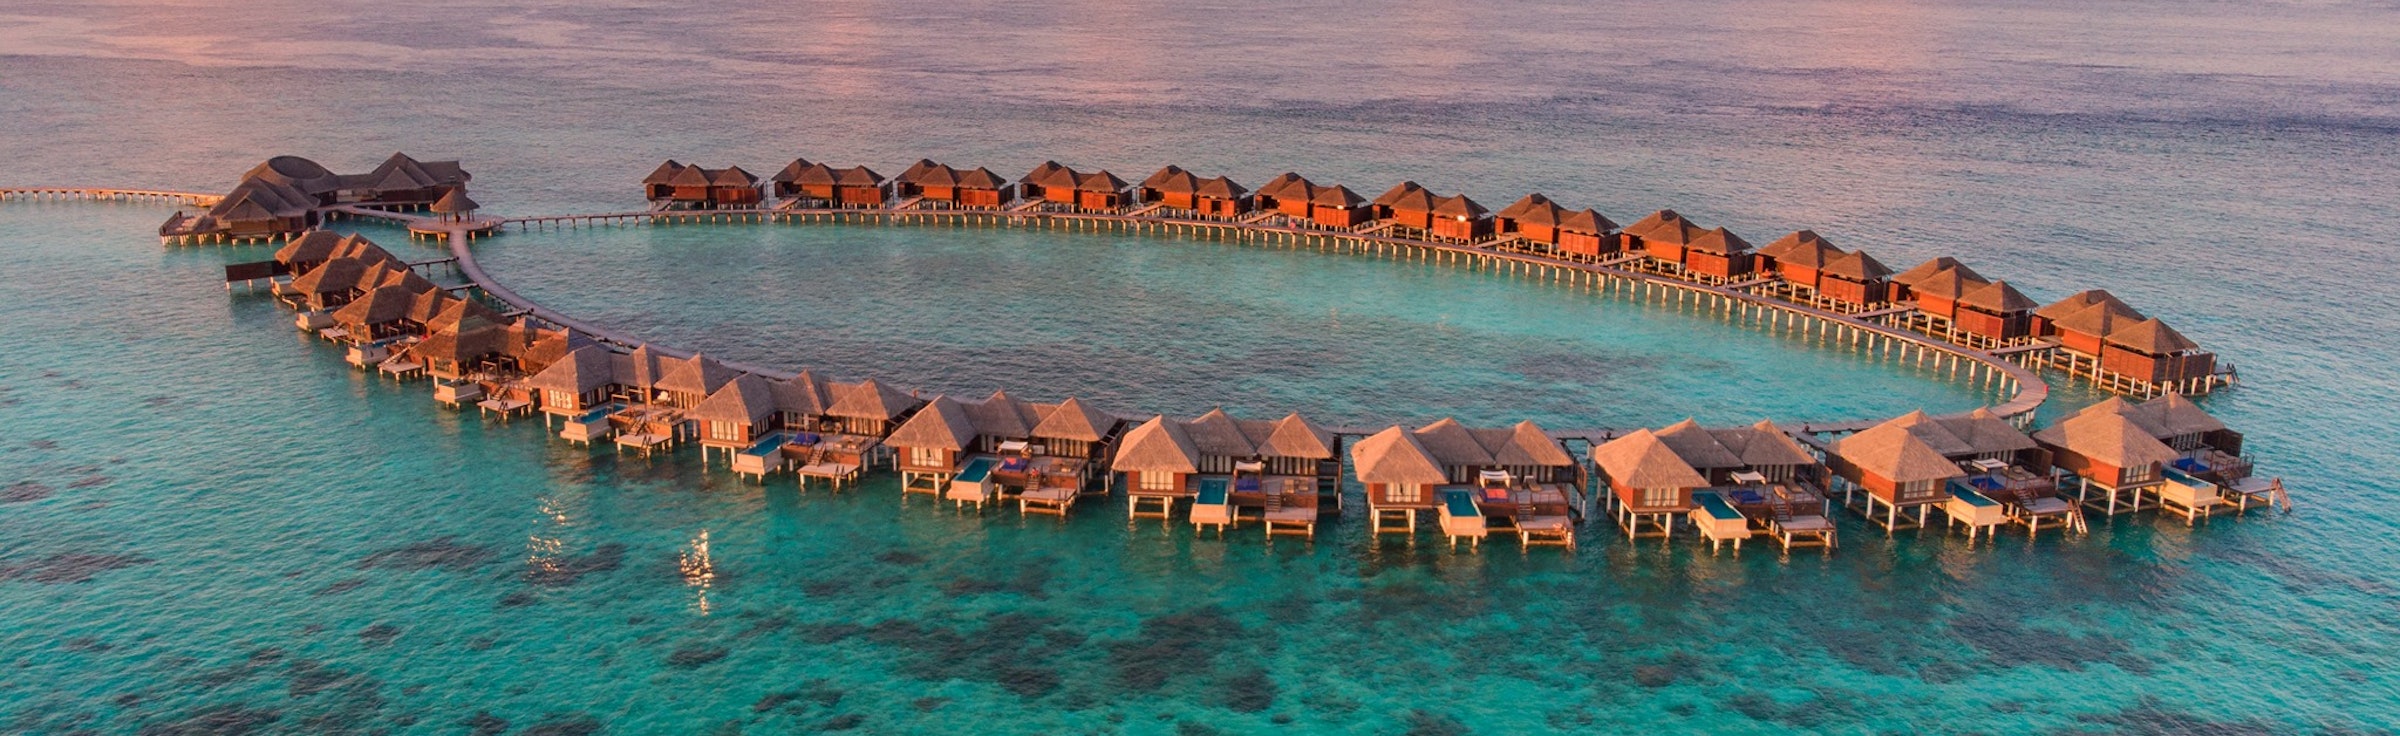 Maldives Tour Packages from Guwahati